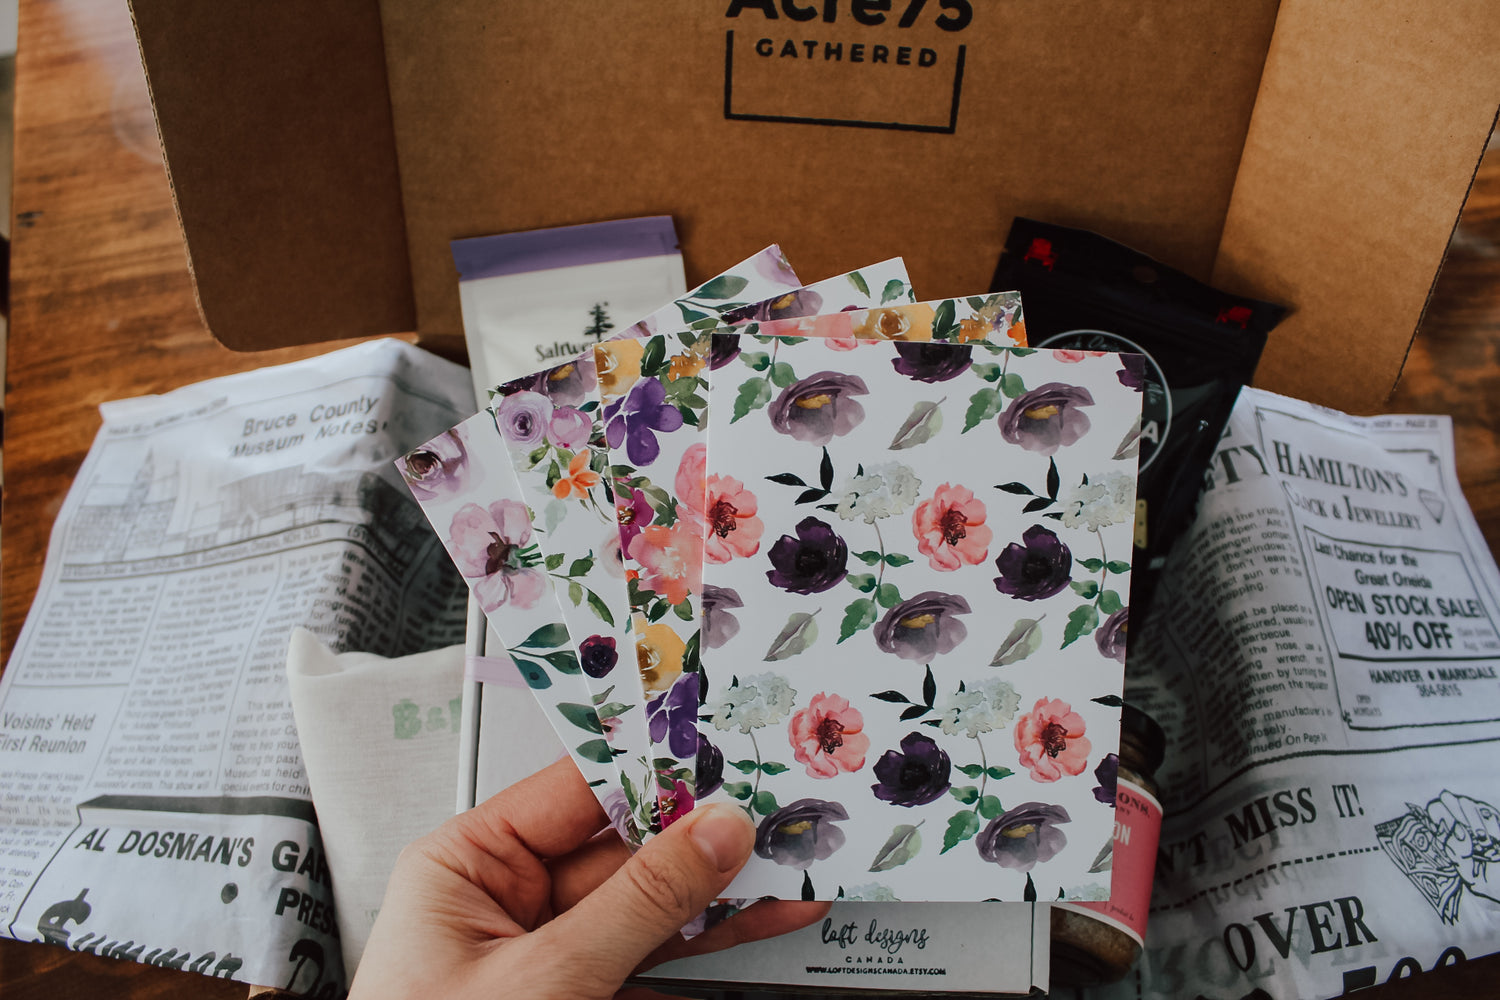 Acre75 Gathered is unlike any other lifestyle subscription box on the market.